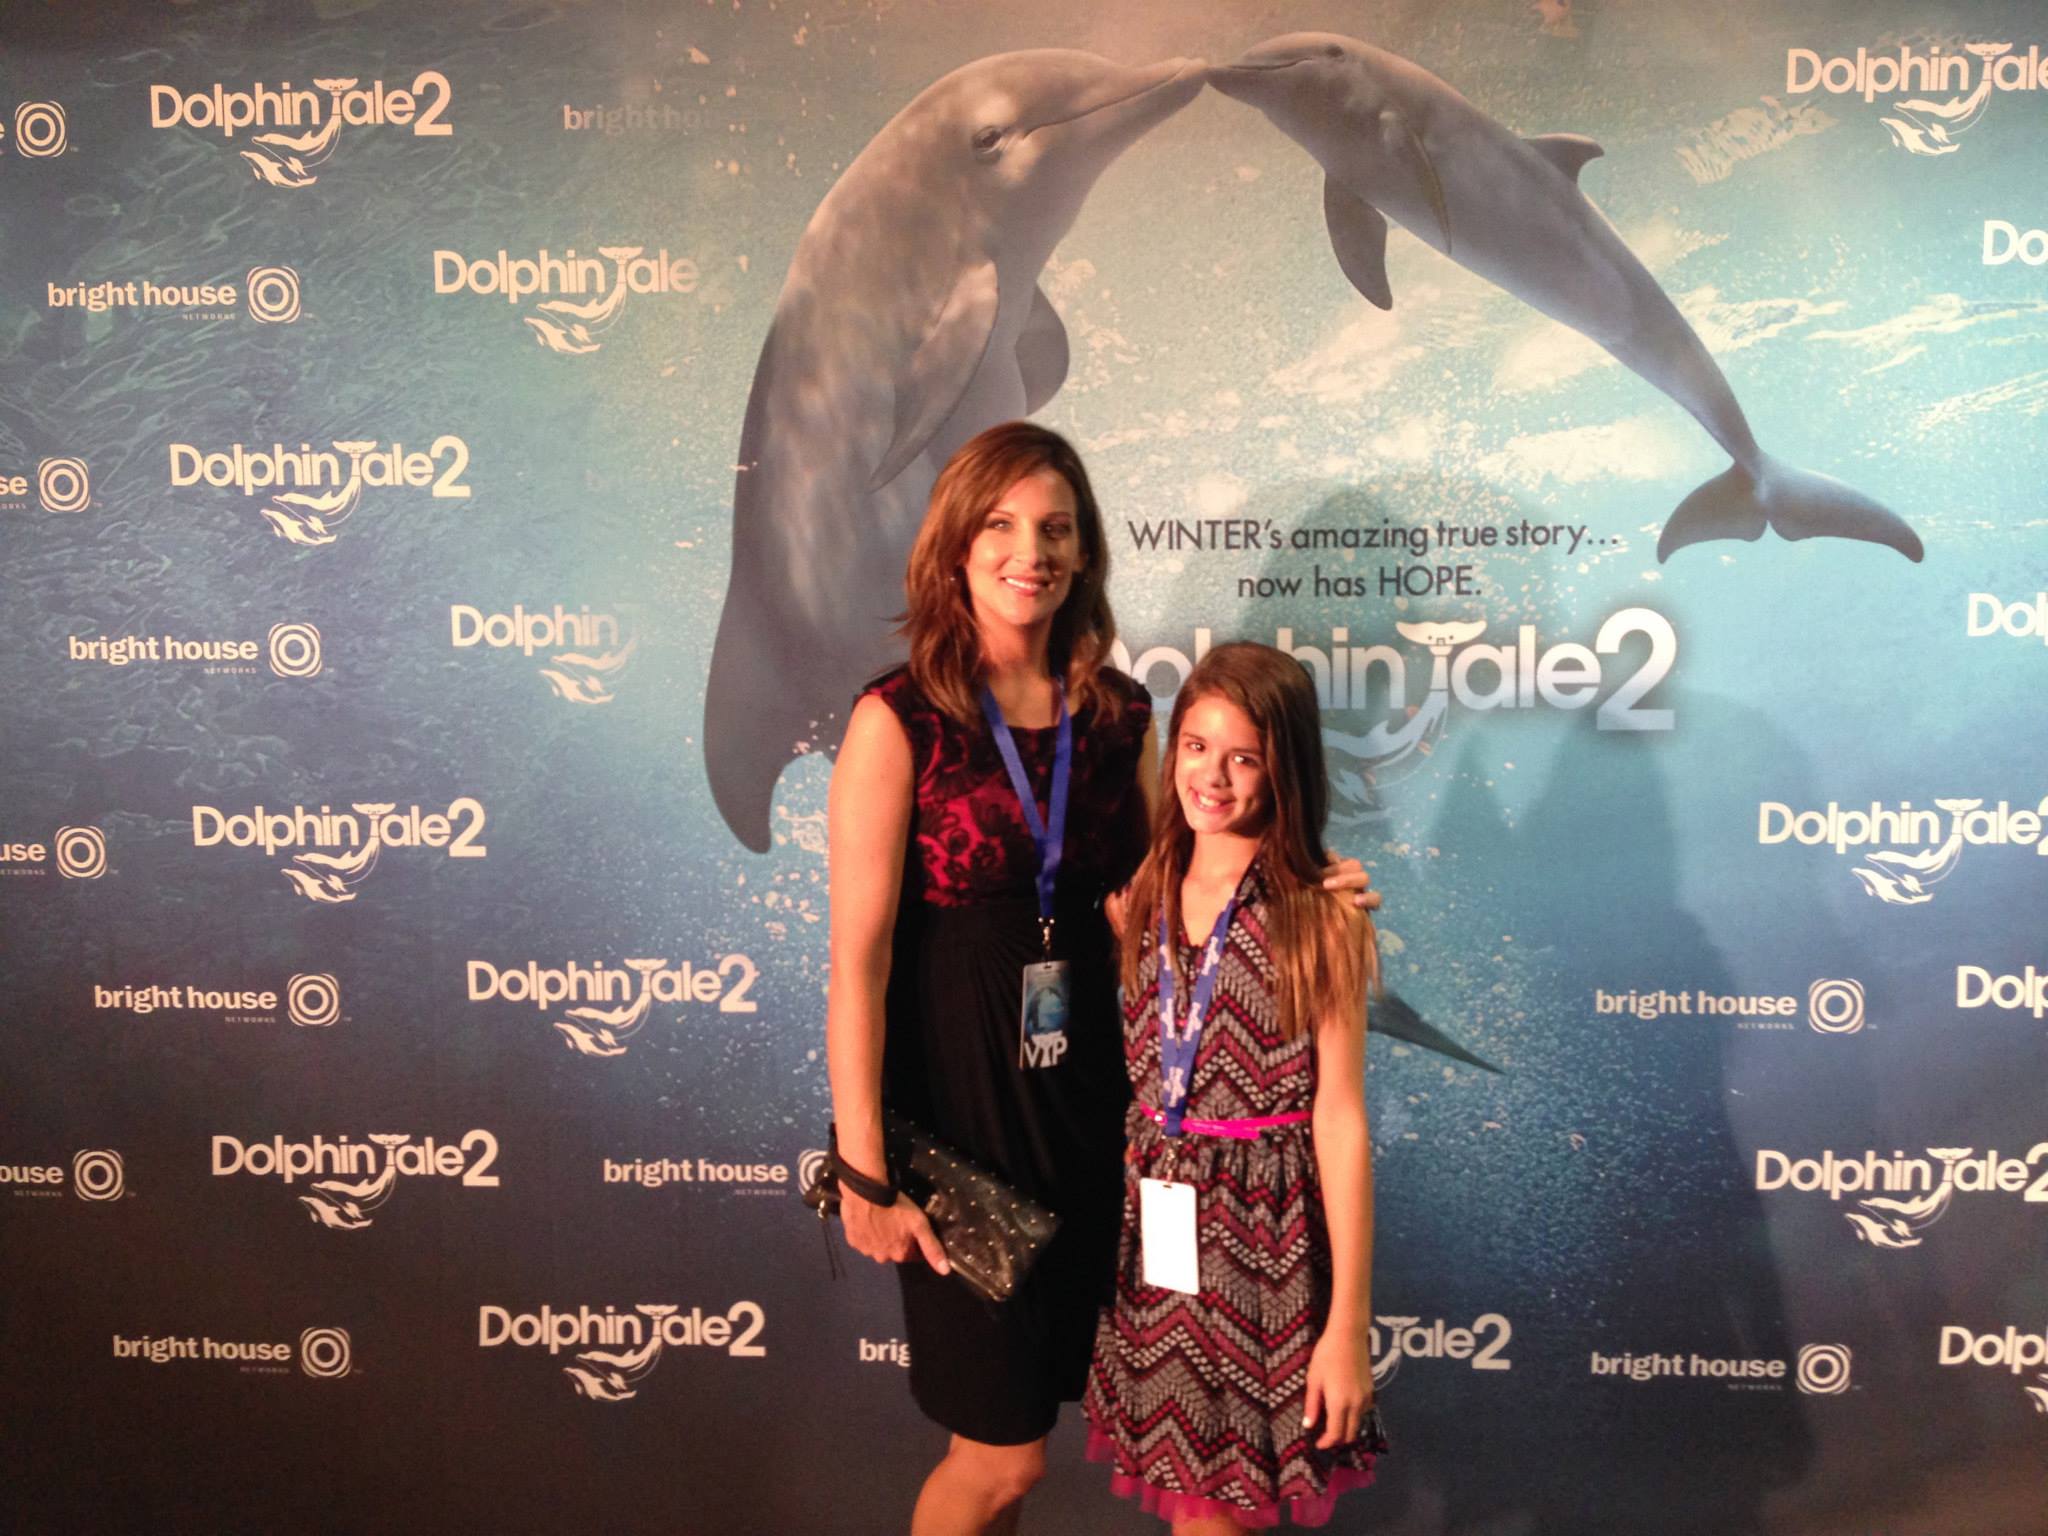 East Coast premiere of Dolphin Tale 2